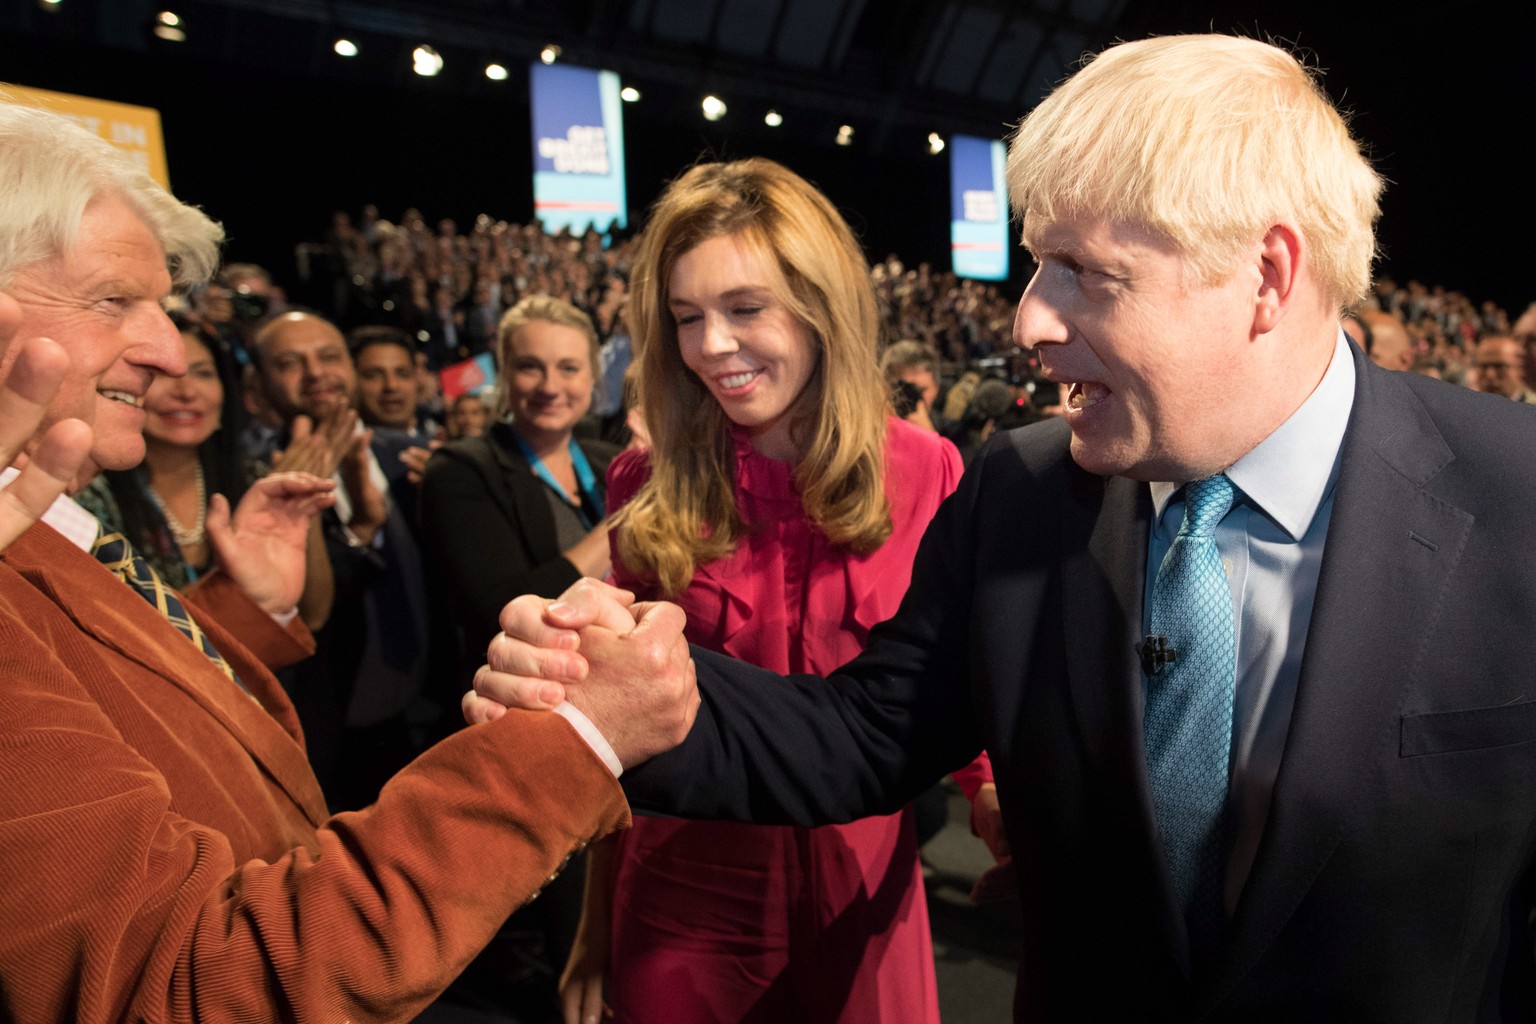 epa07889366 Prime Minister Boris Johnson leaves the stage with his partner Carrie Symonds as he is congratulated by his father Stanley Johnson after delivering his speech during the Conservative Party ...